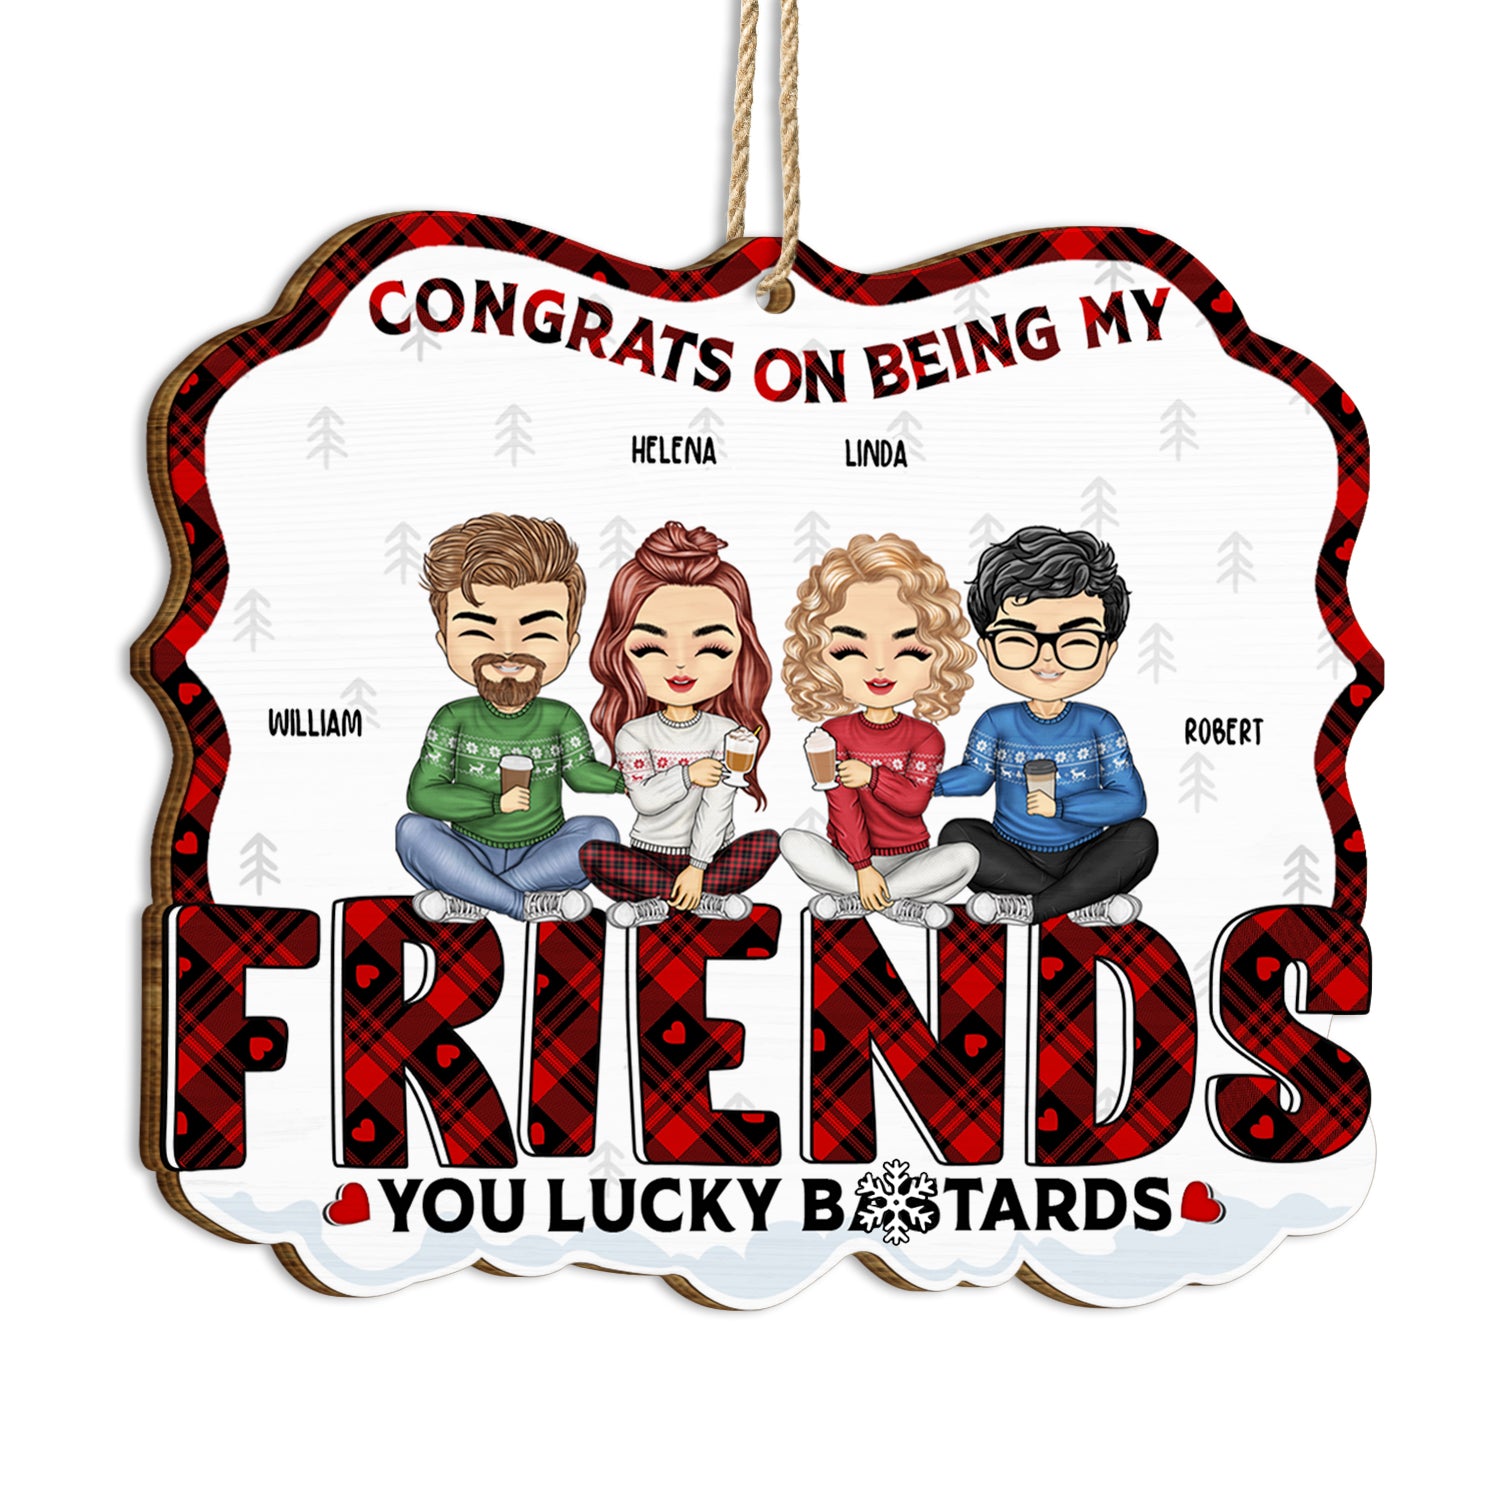 Congrats On Being My Bestie Chibi - Christmas Gift For Friends - Personalized Custom Shaped Wooden Ornament